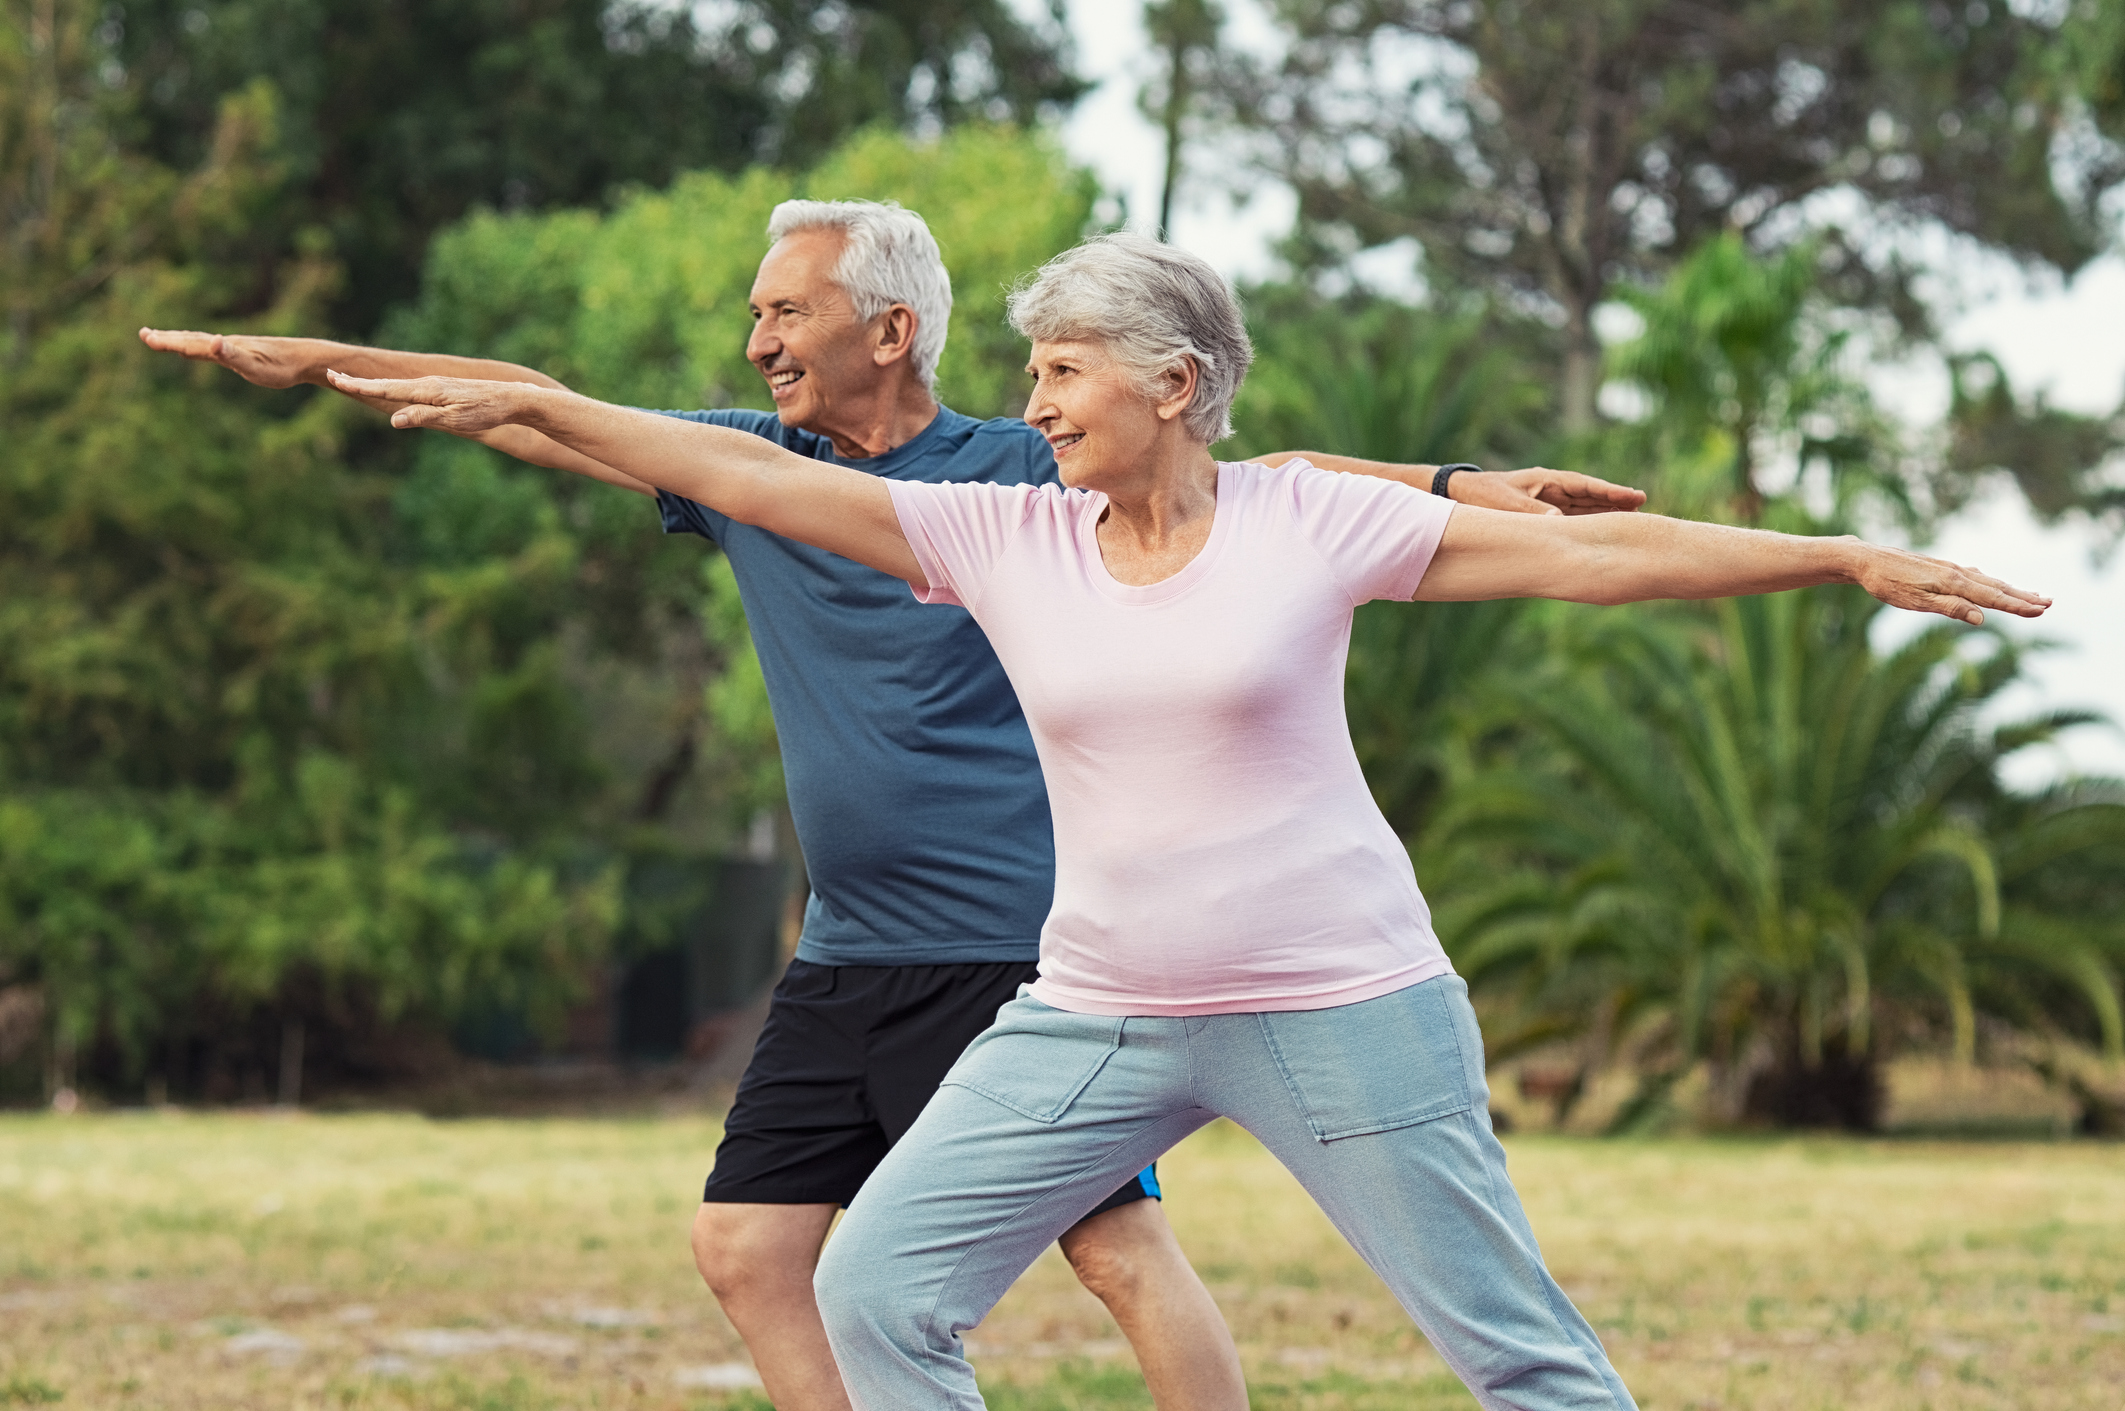 Fun Exercises for the Elderly to Stay Active and Healthy - CareLink